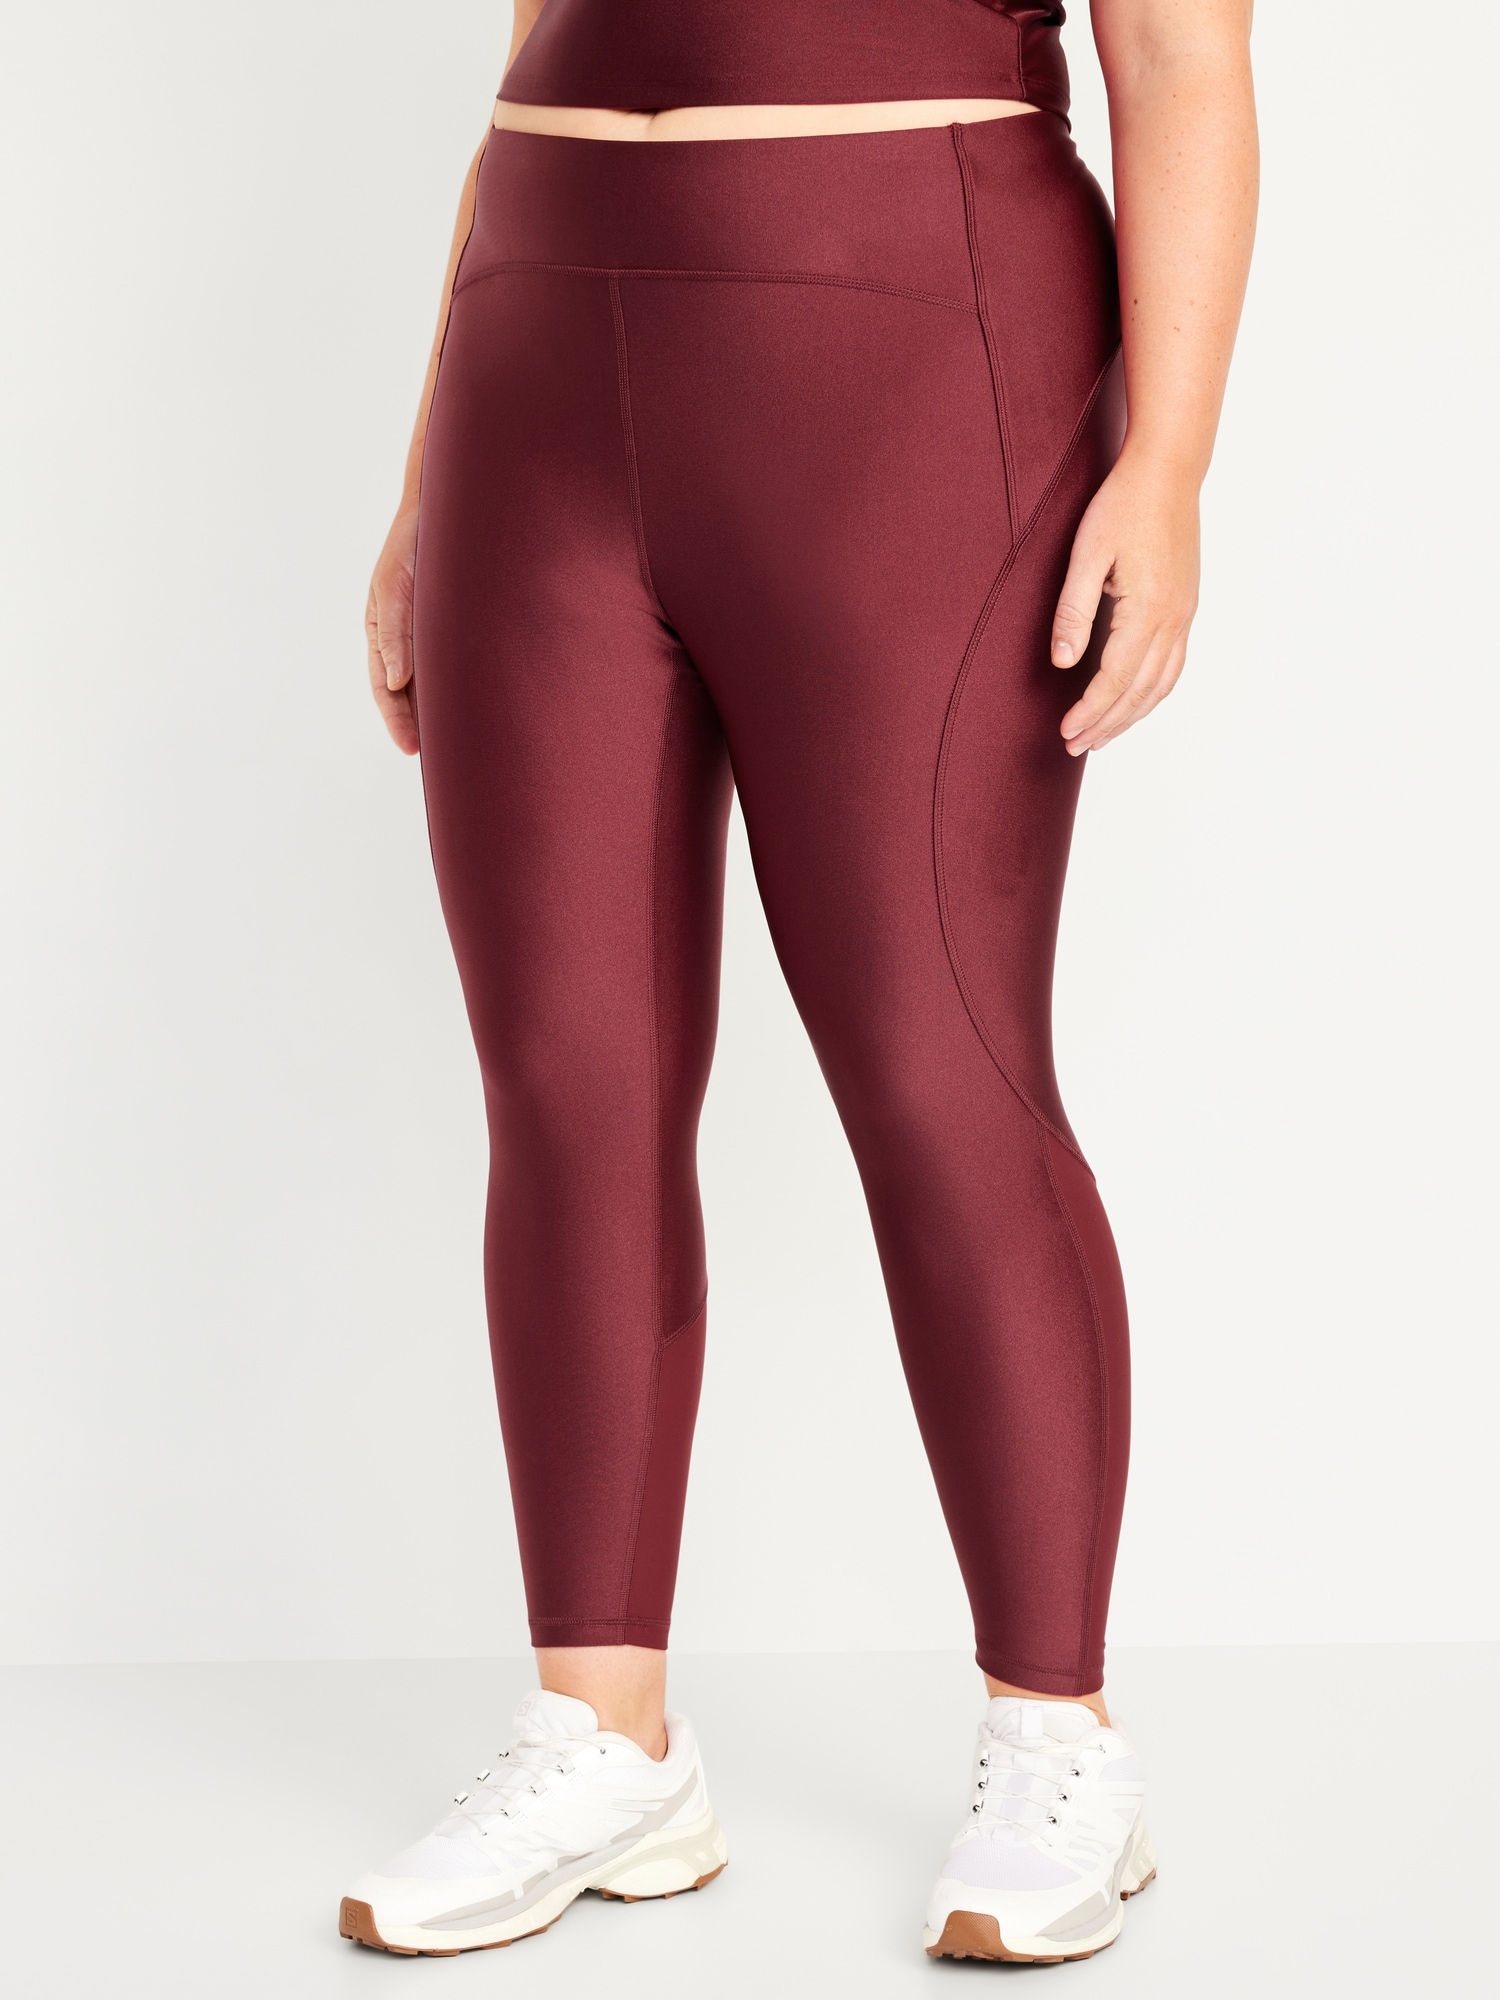 Old Navy High-Waisted PowerSoft 7/8-Length Leggings for Women Size